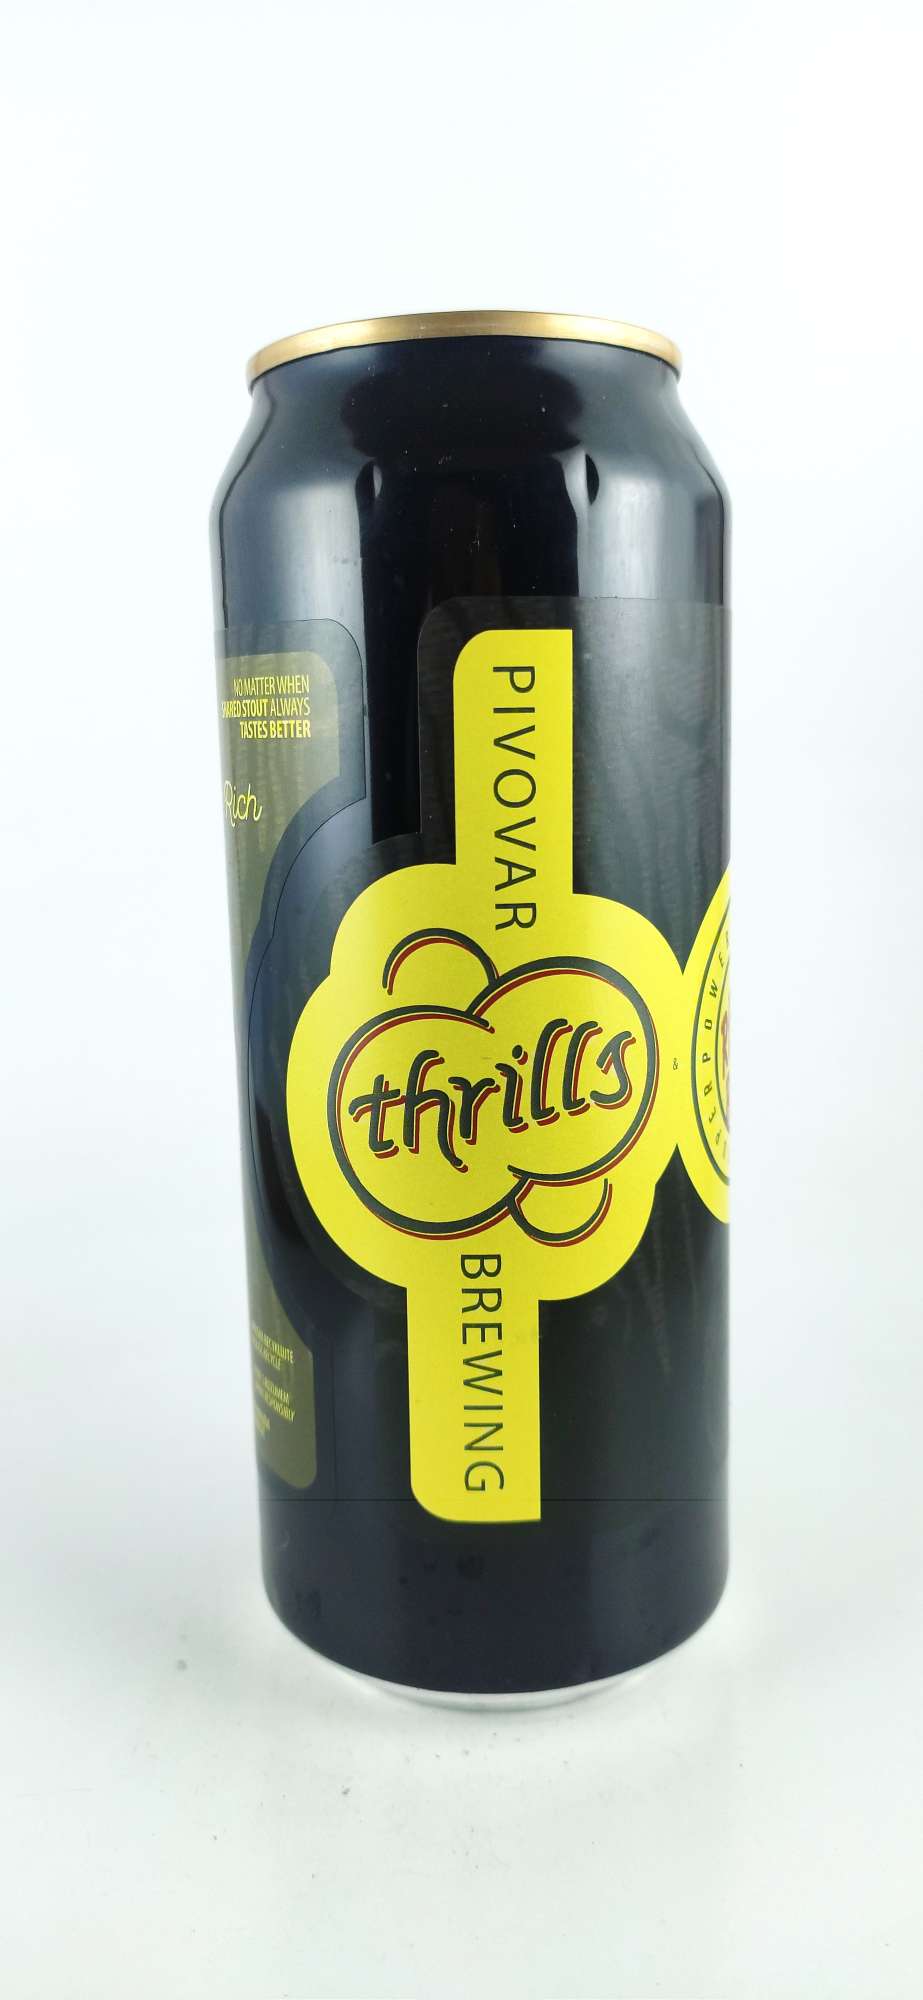 Thrills Life after Death Imperial Stout 20°